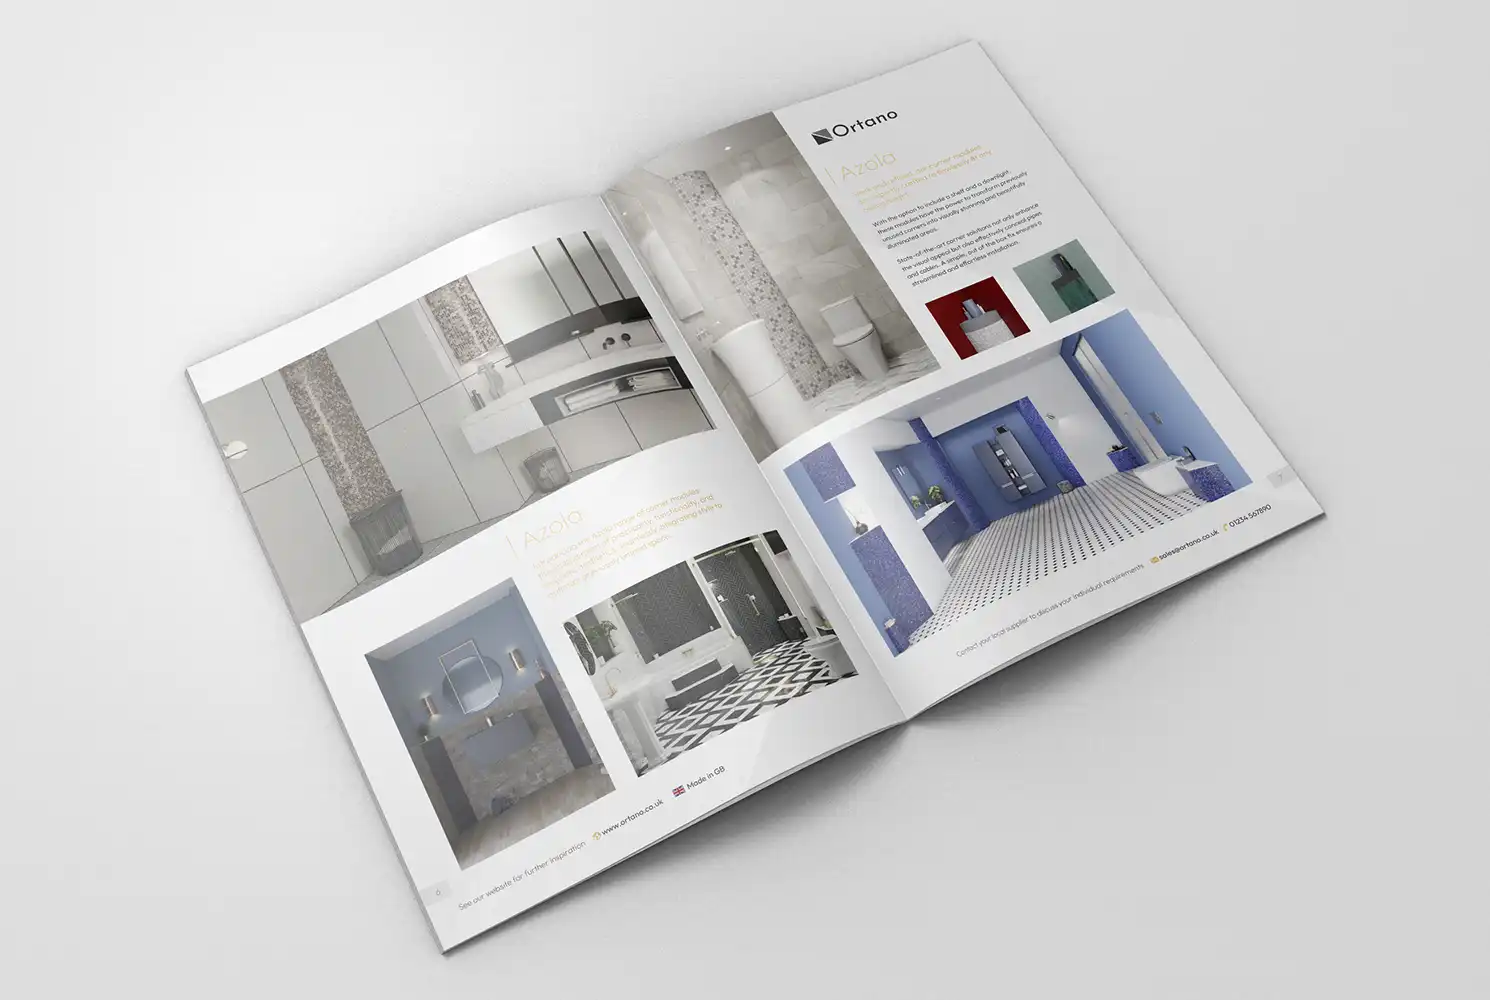 Mockup of Ortano accessories brochure design showing a double page spread of lifestyle pages